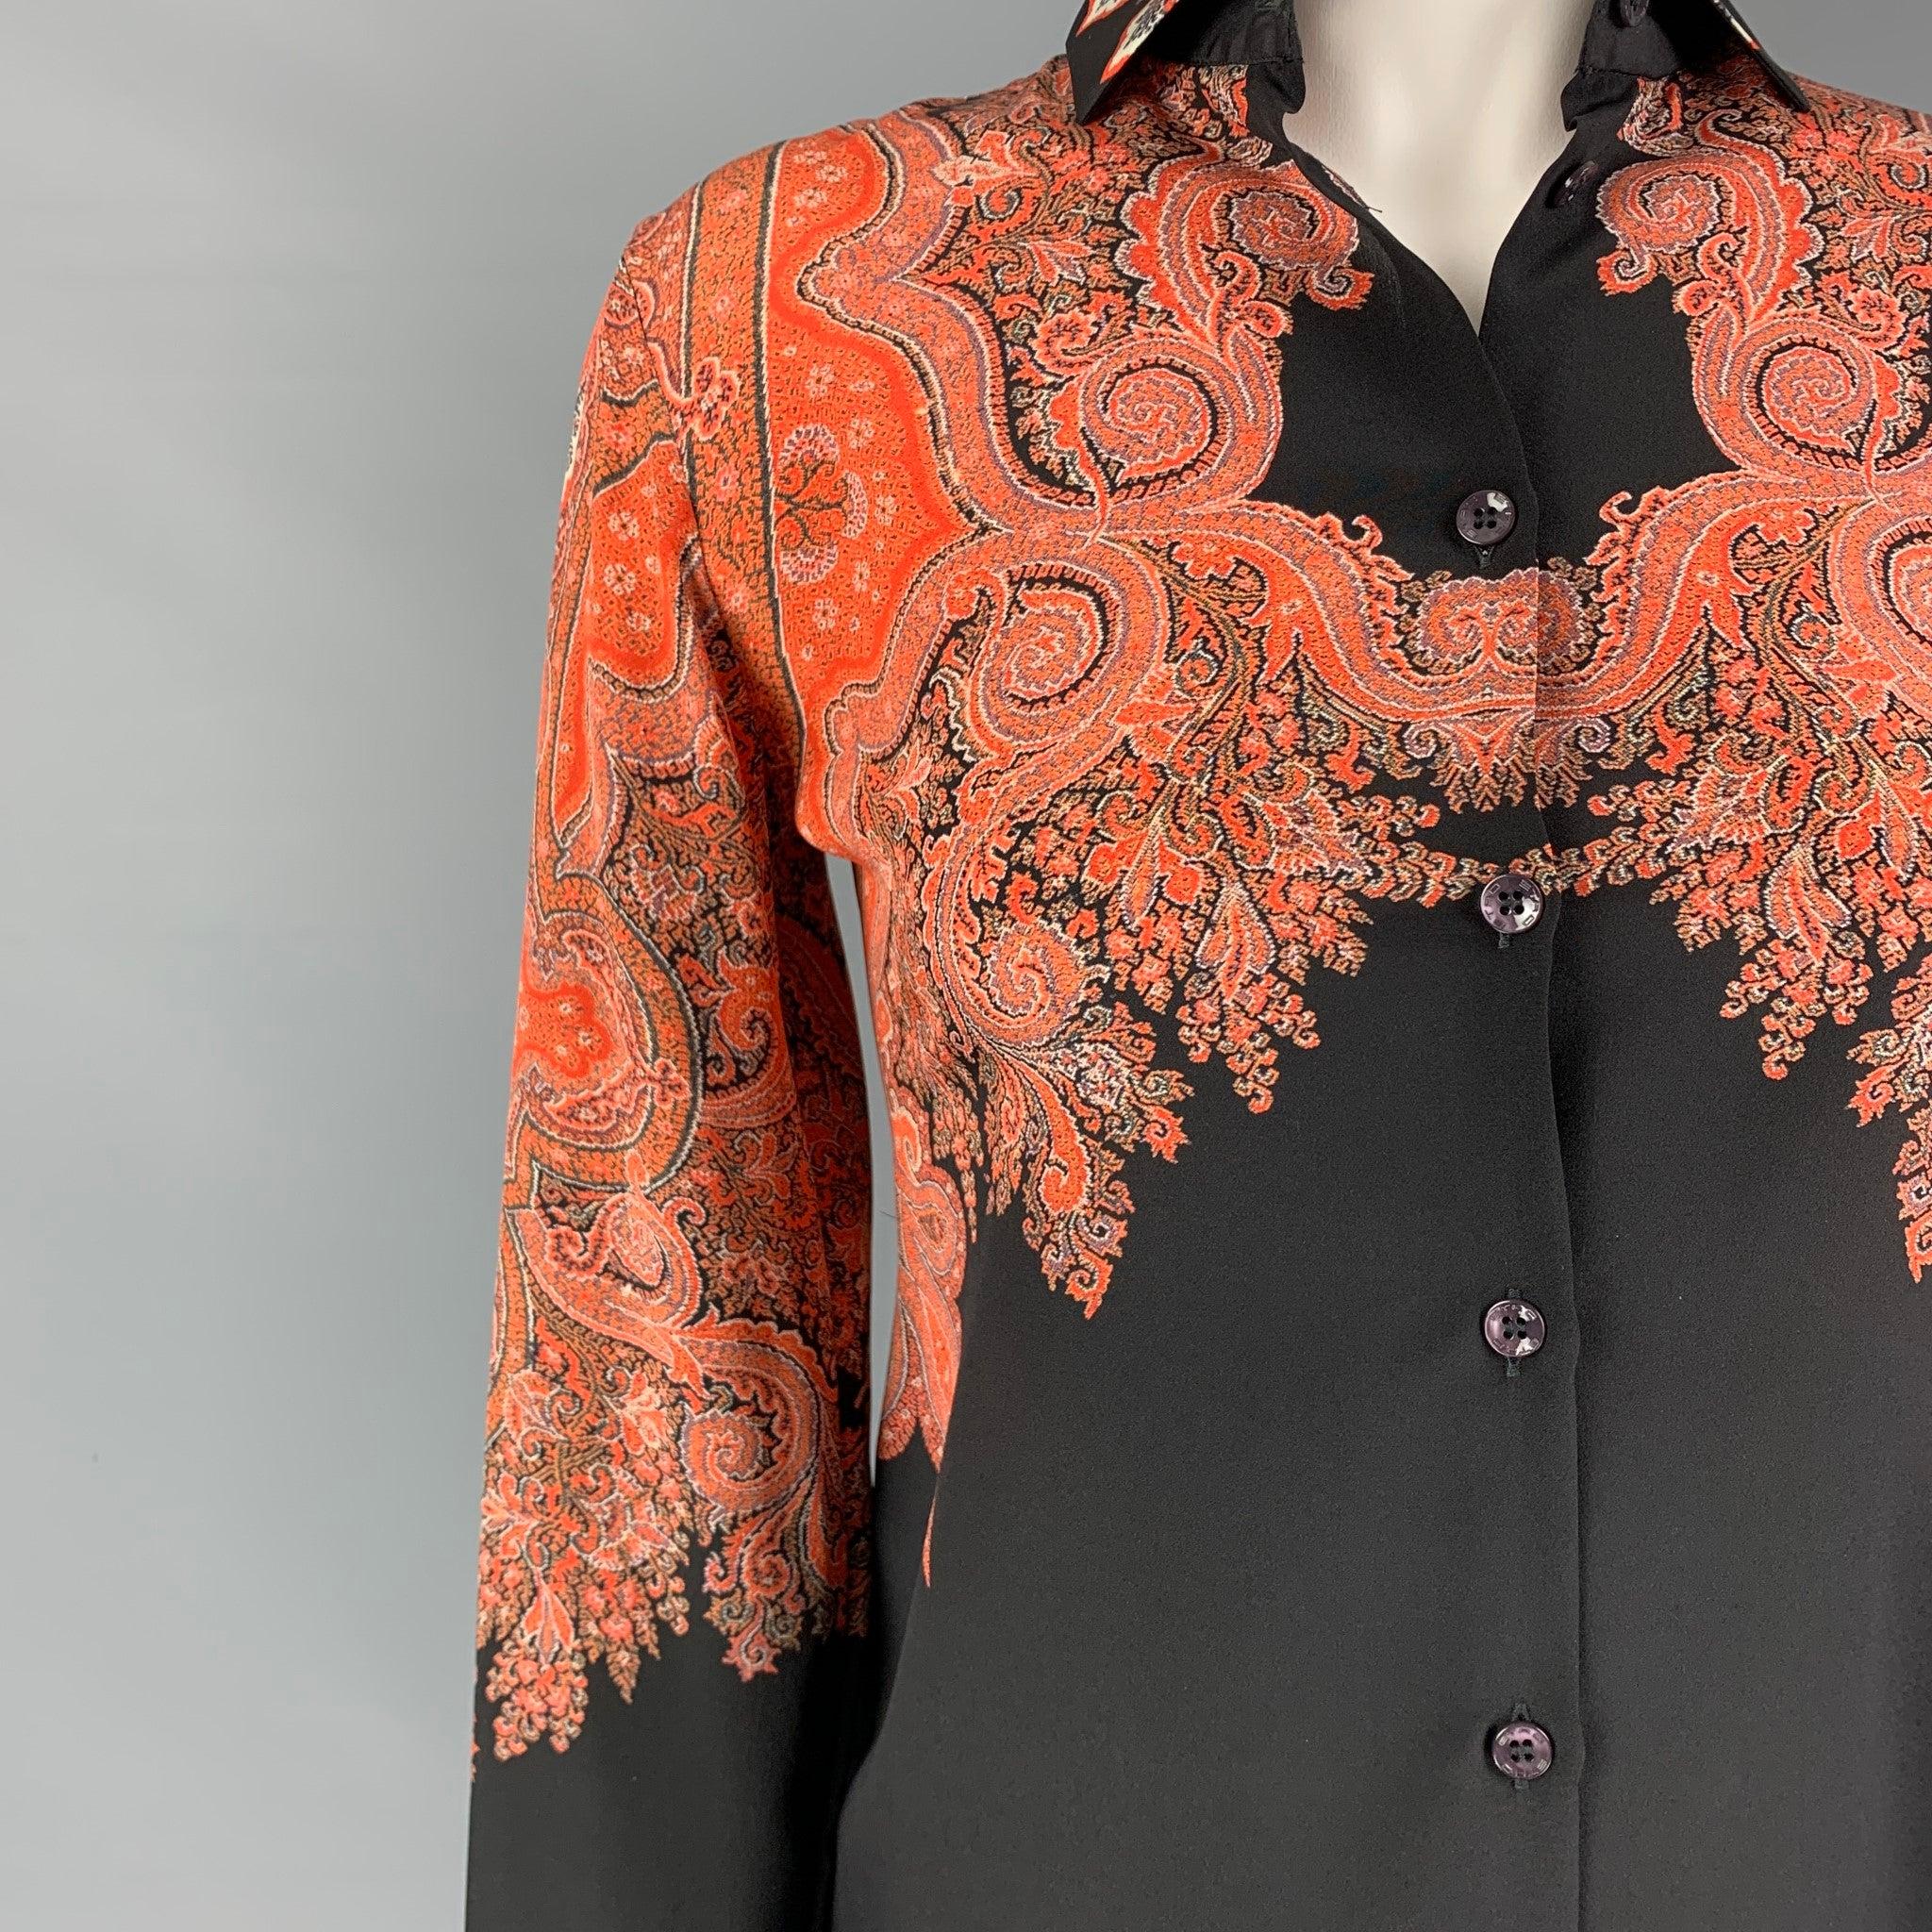 ETRO top comes in a orange & black paisley silk featuring a spread collar and a buttoned closure. Made in Italy.
Excellent
Pre-Owned Condition. 

Marked:   38 

Measurements: 
 
Shoulder: 15.5 inches Bust: 34 inches Sleeve: 23 inches Length: 27